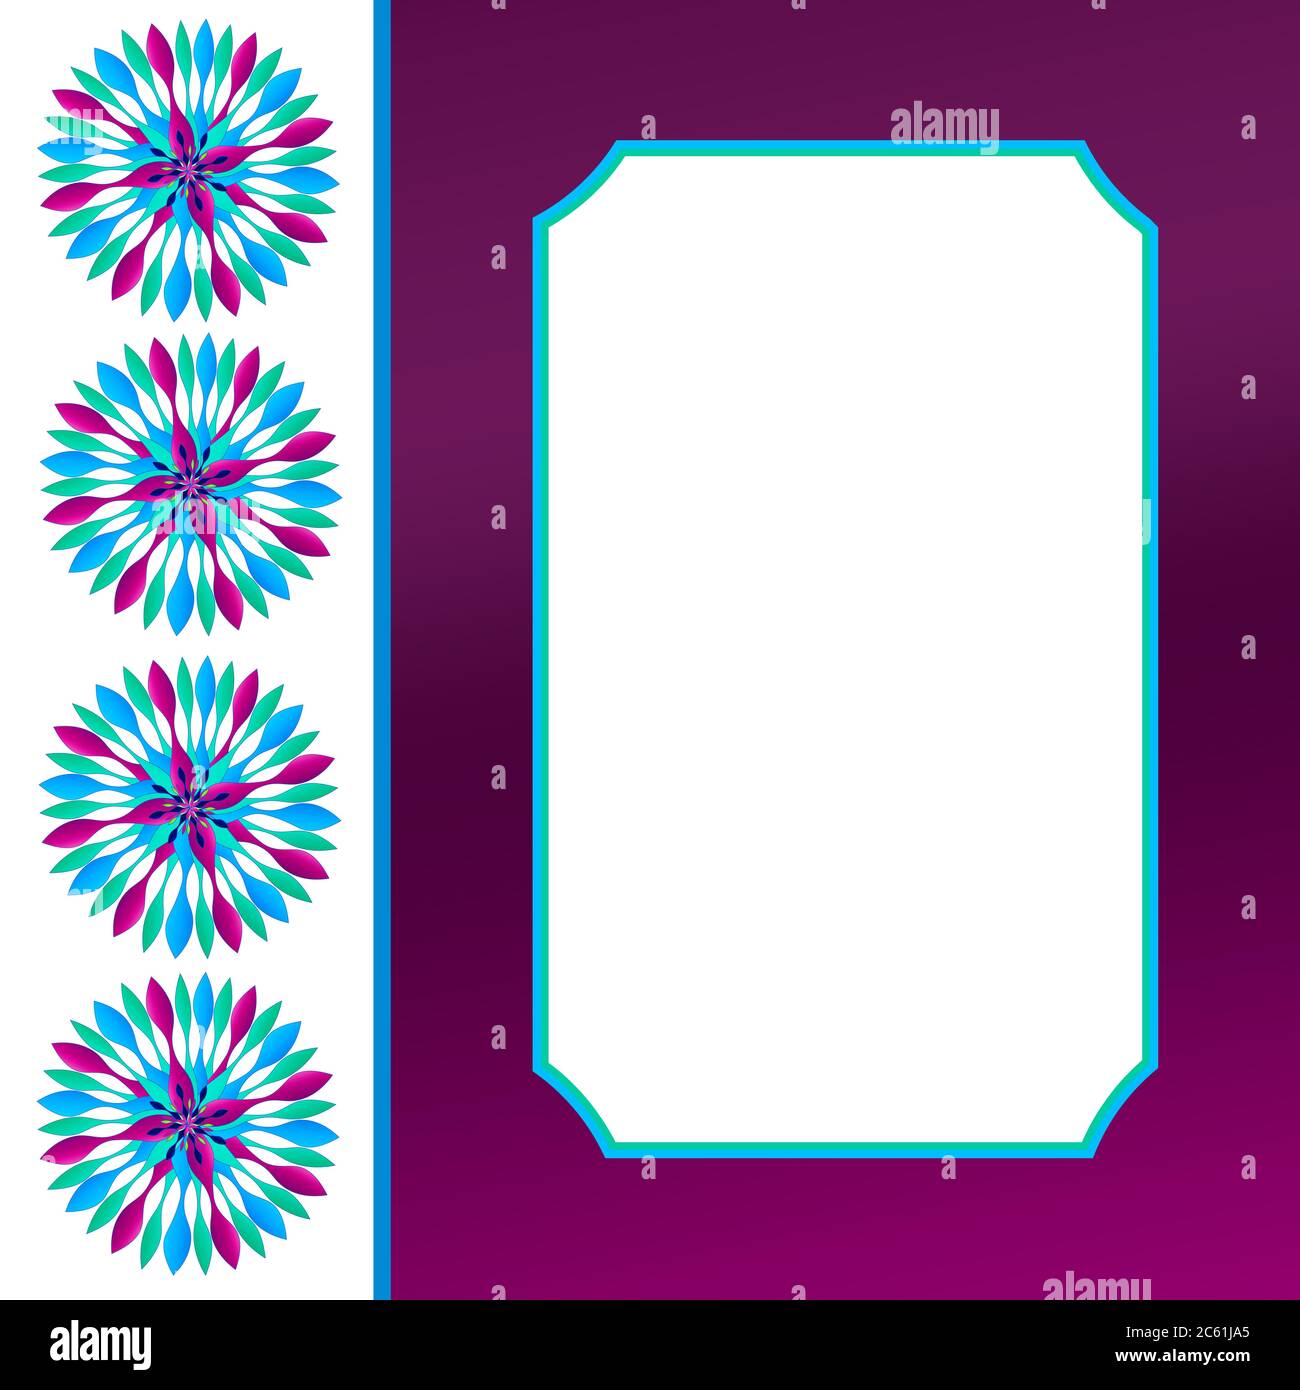 Beautiful graphic Spinner-like design Motifs in a unique colorful scheme of colors including purple, aqua teal and blues.  Some with borders. Stock Photo